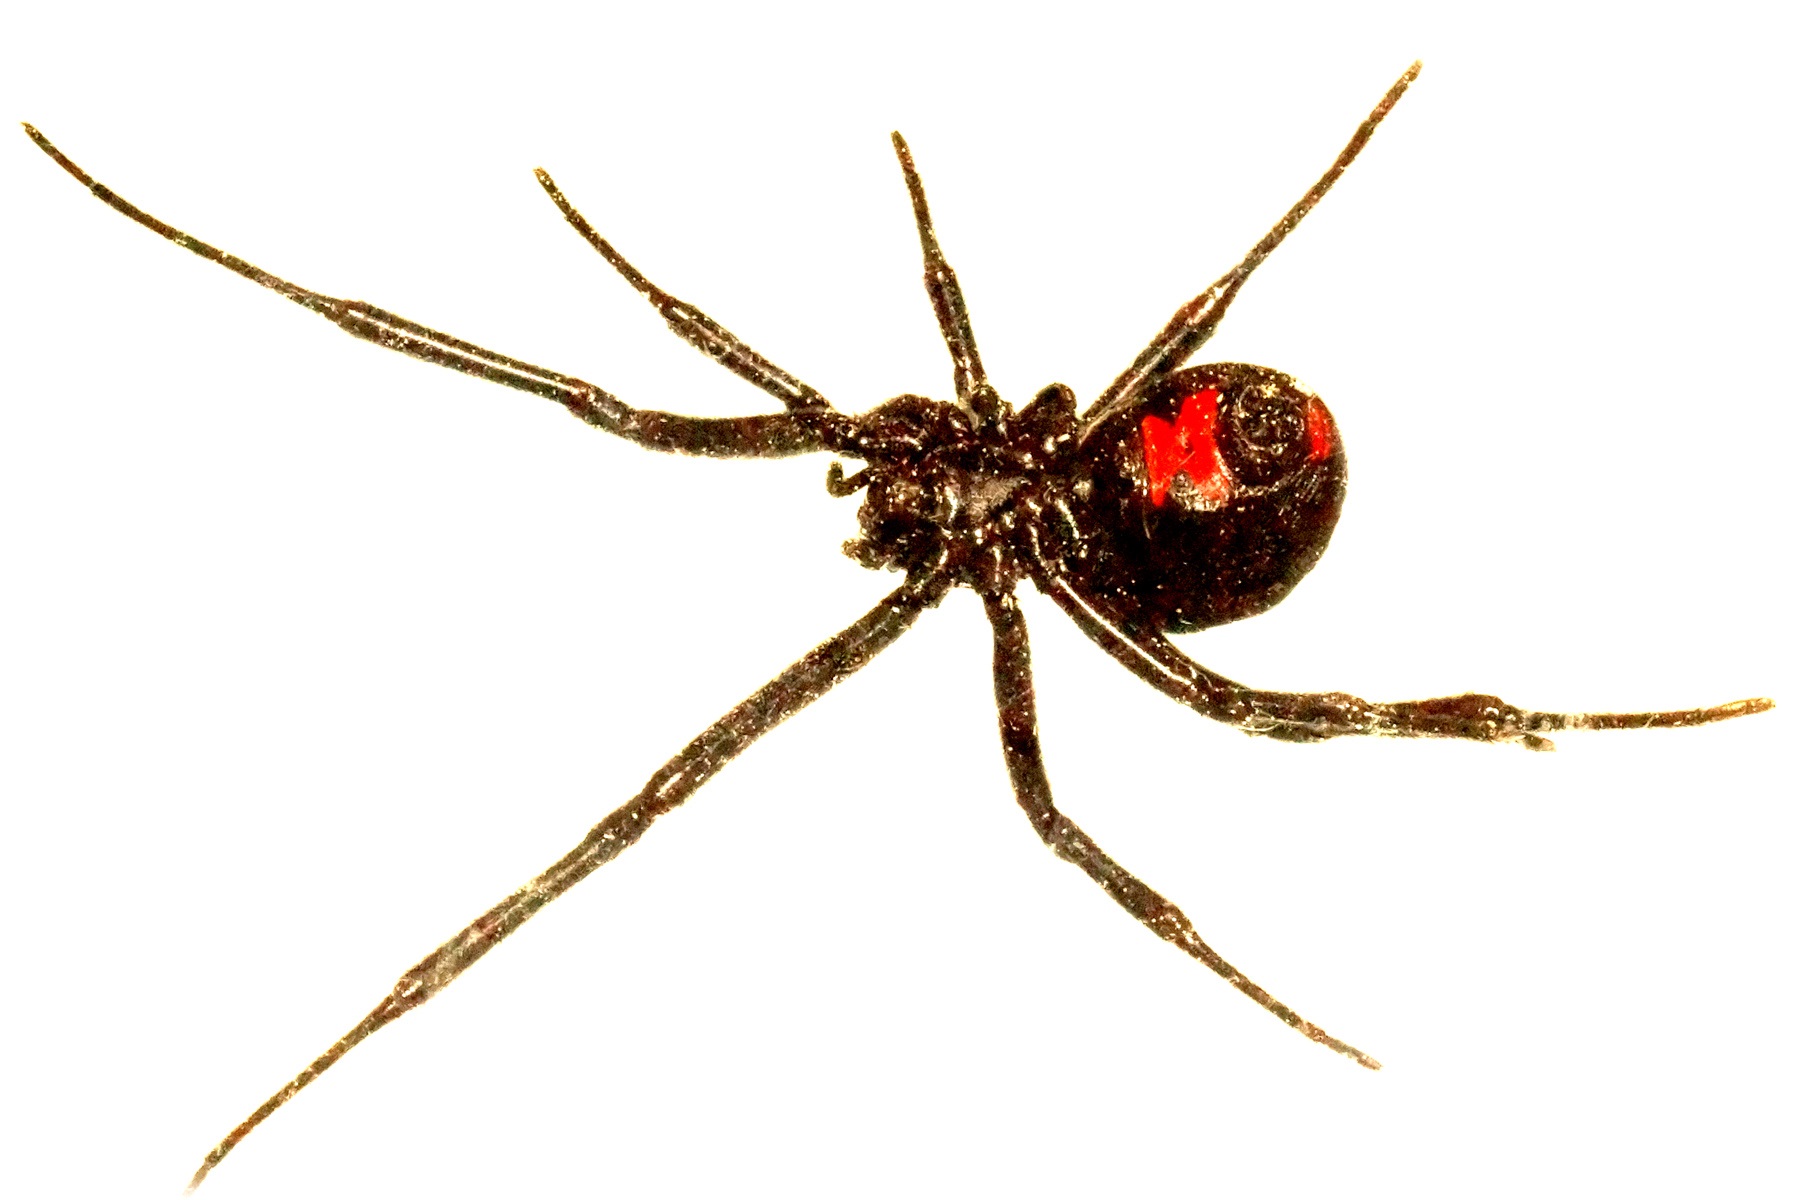 Three young brothers let black widow bite them in hopes of turning into  Spider-Man 